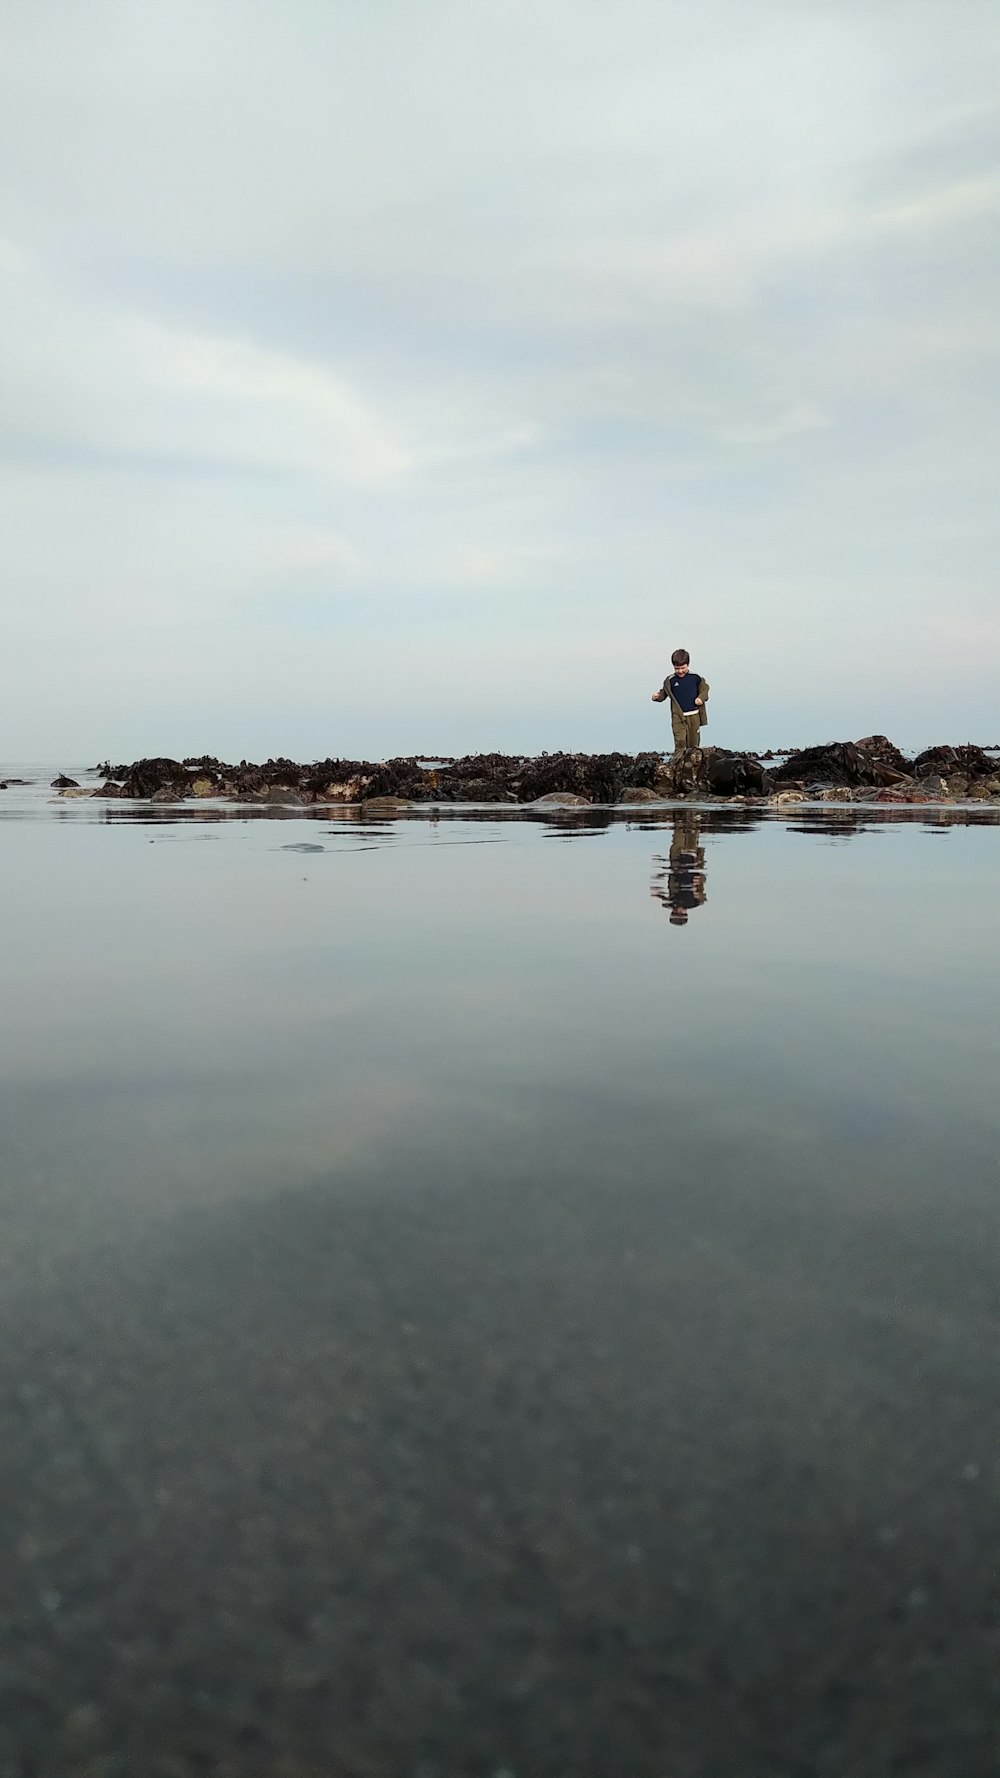 man in black shirt standing on brown rock formation in the middle of water during daytime